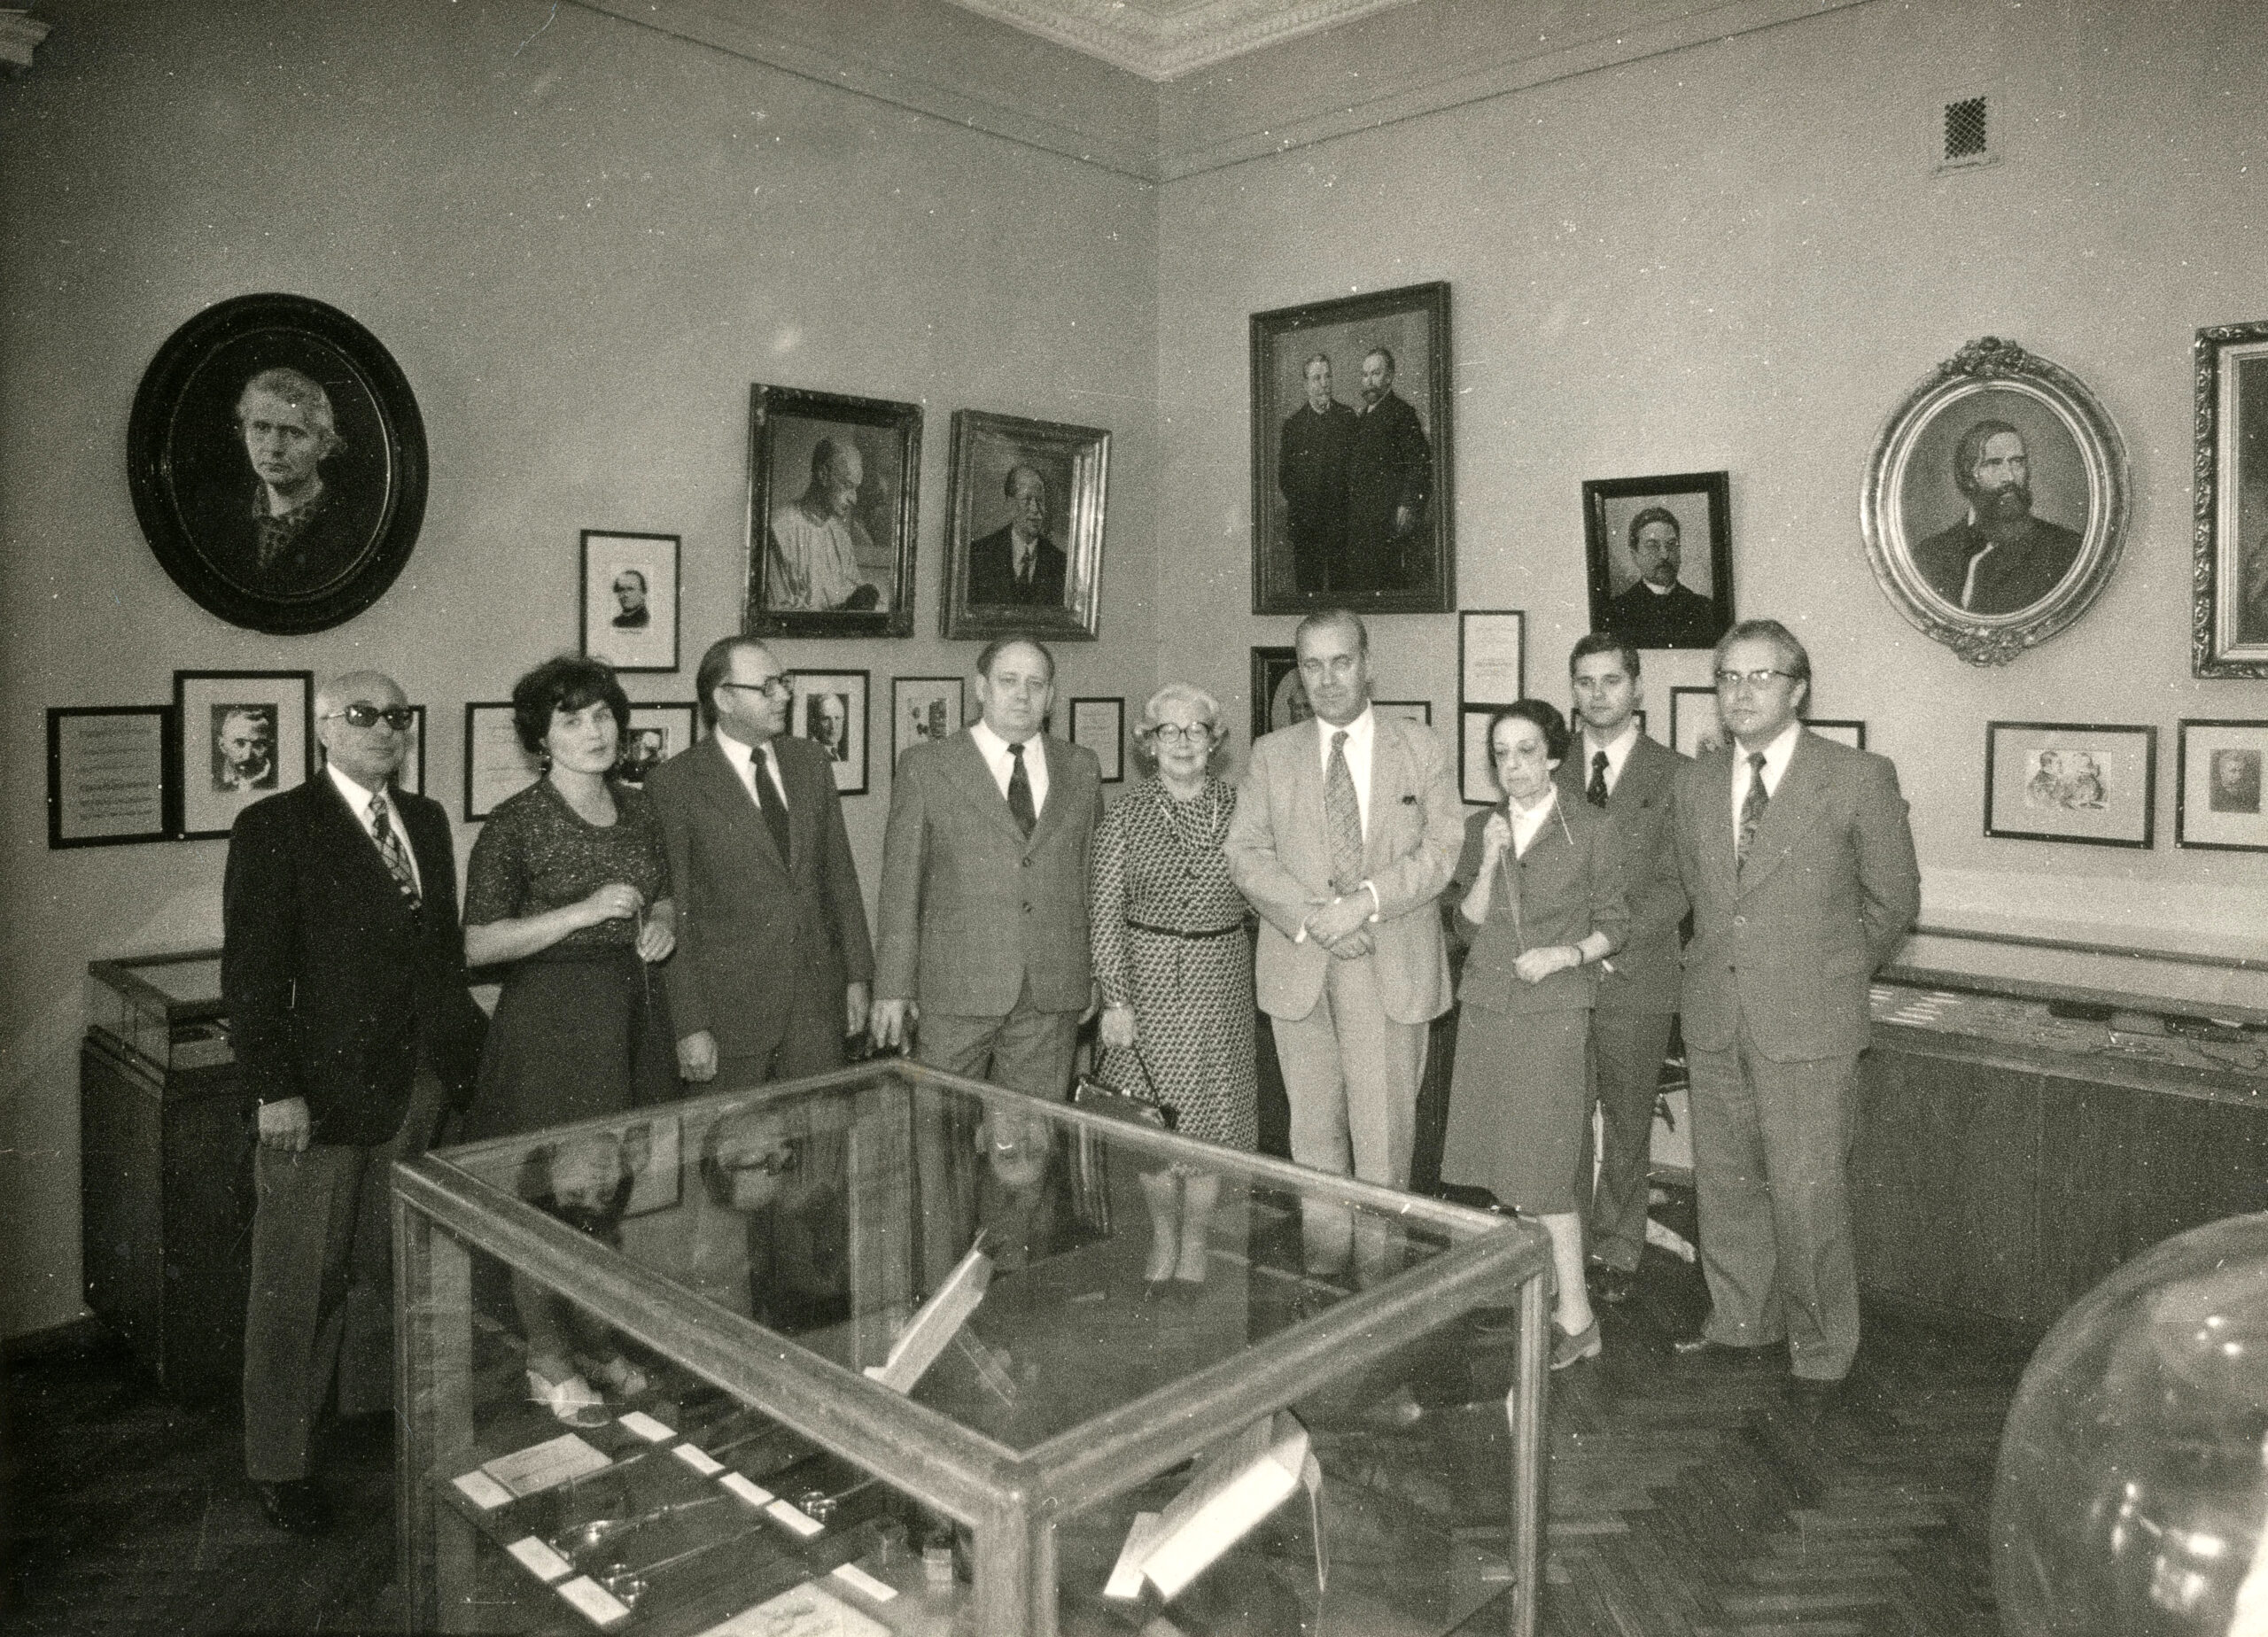 Nine people have lined up in the middle of one of the exhibition halls of the museum. A glass display case can be seen in the foreground. In the background there are other showcases and on the wall you can see many different paintings and photographs, mostly portraits.